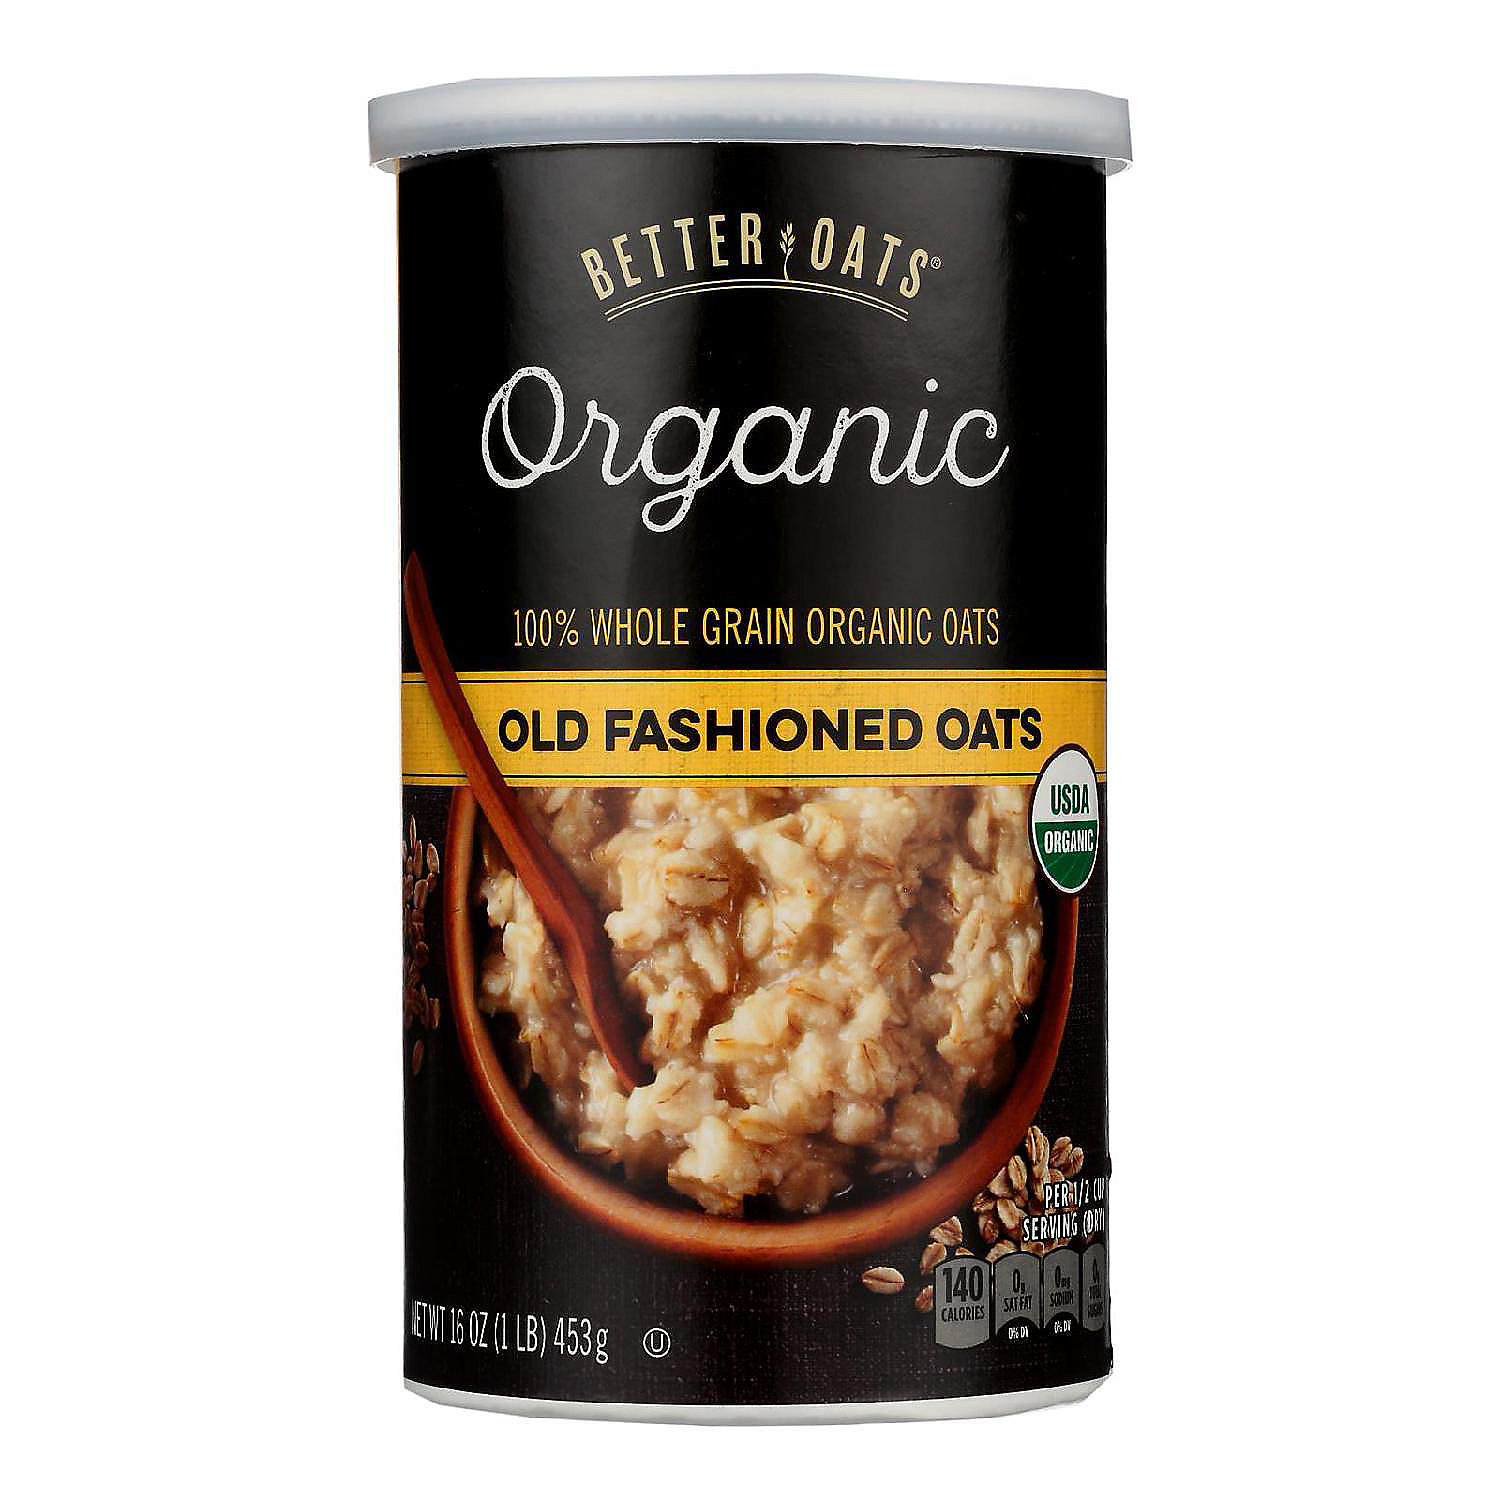 Better Oats Organic Cereal - Old Fashioned Oats - Case of 12 - 16 oz.